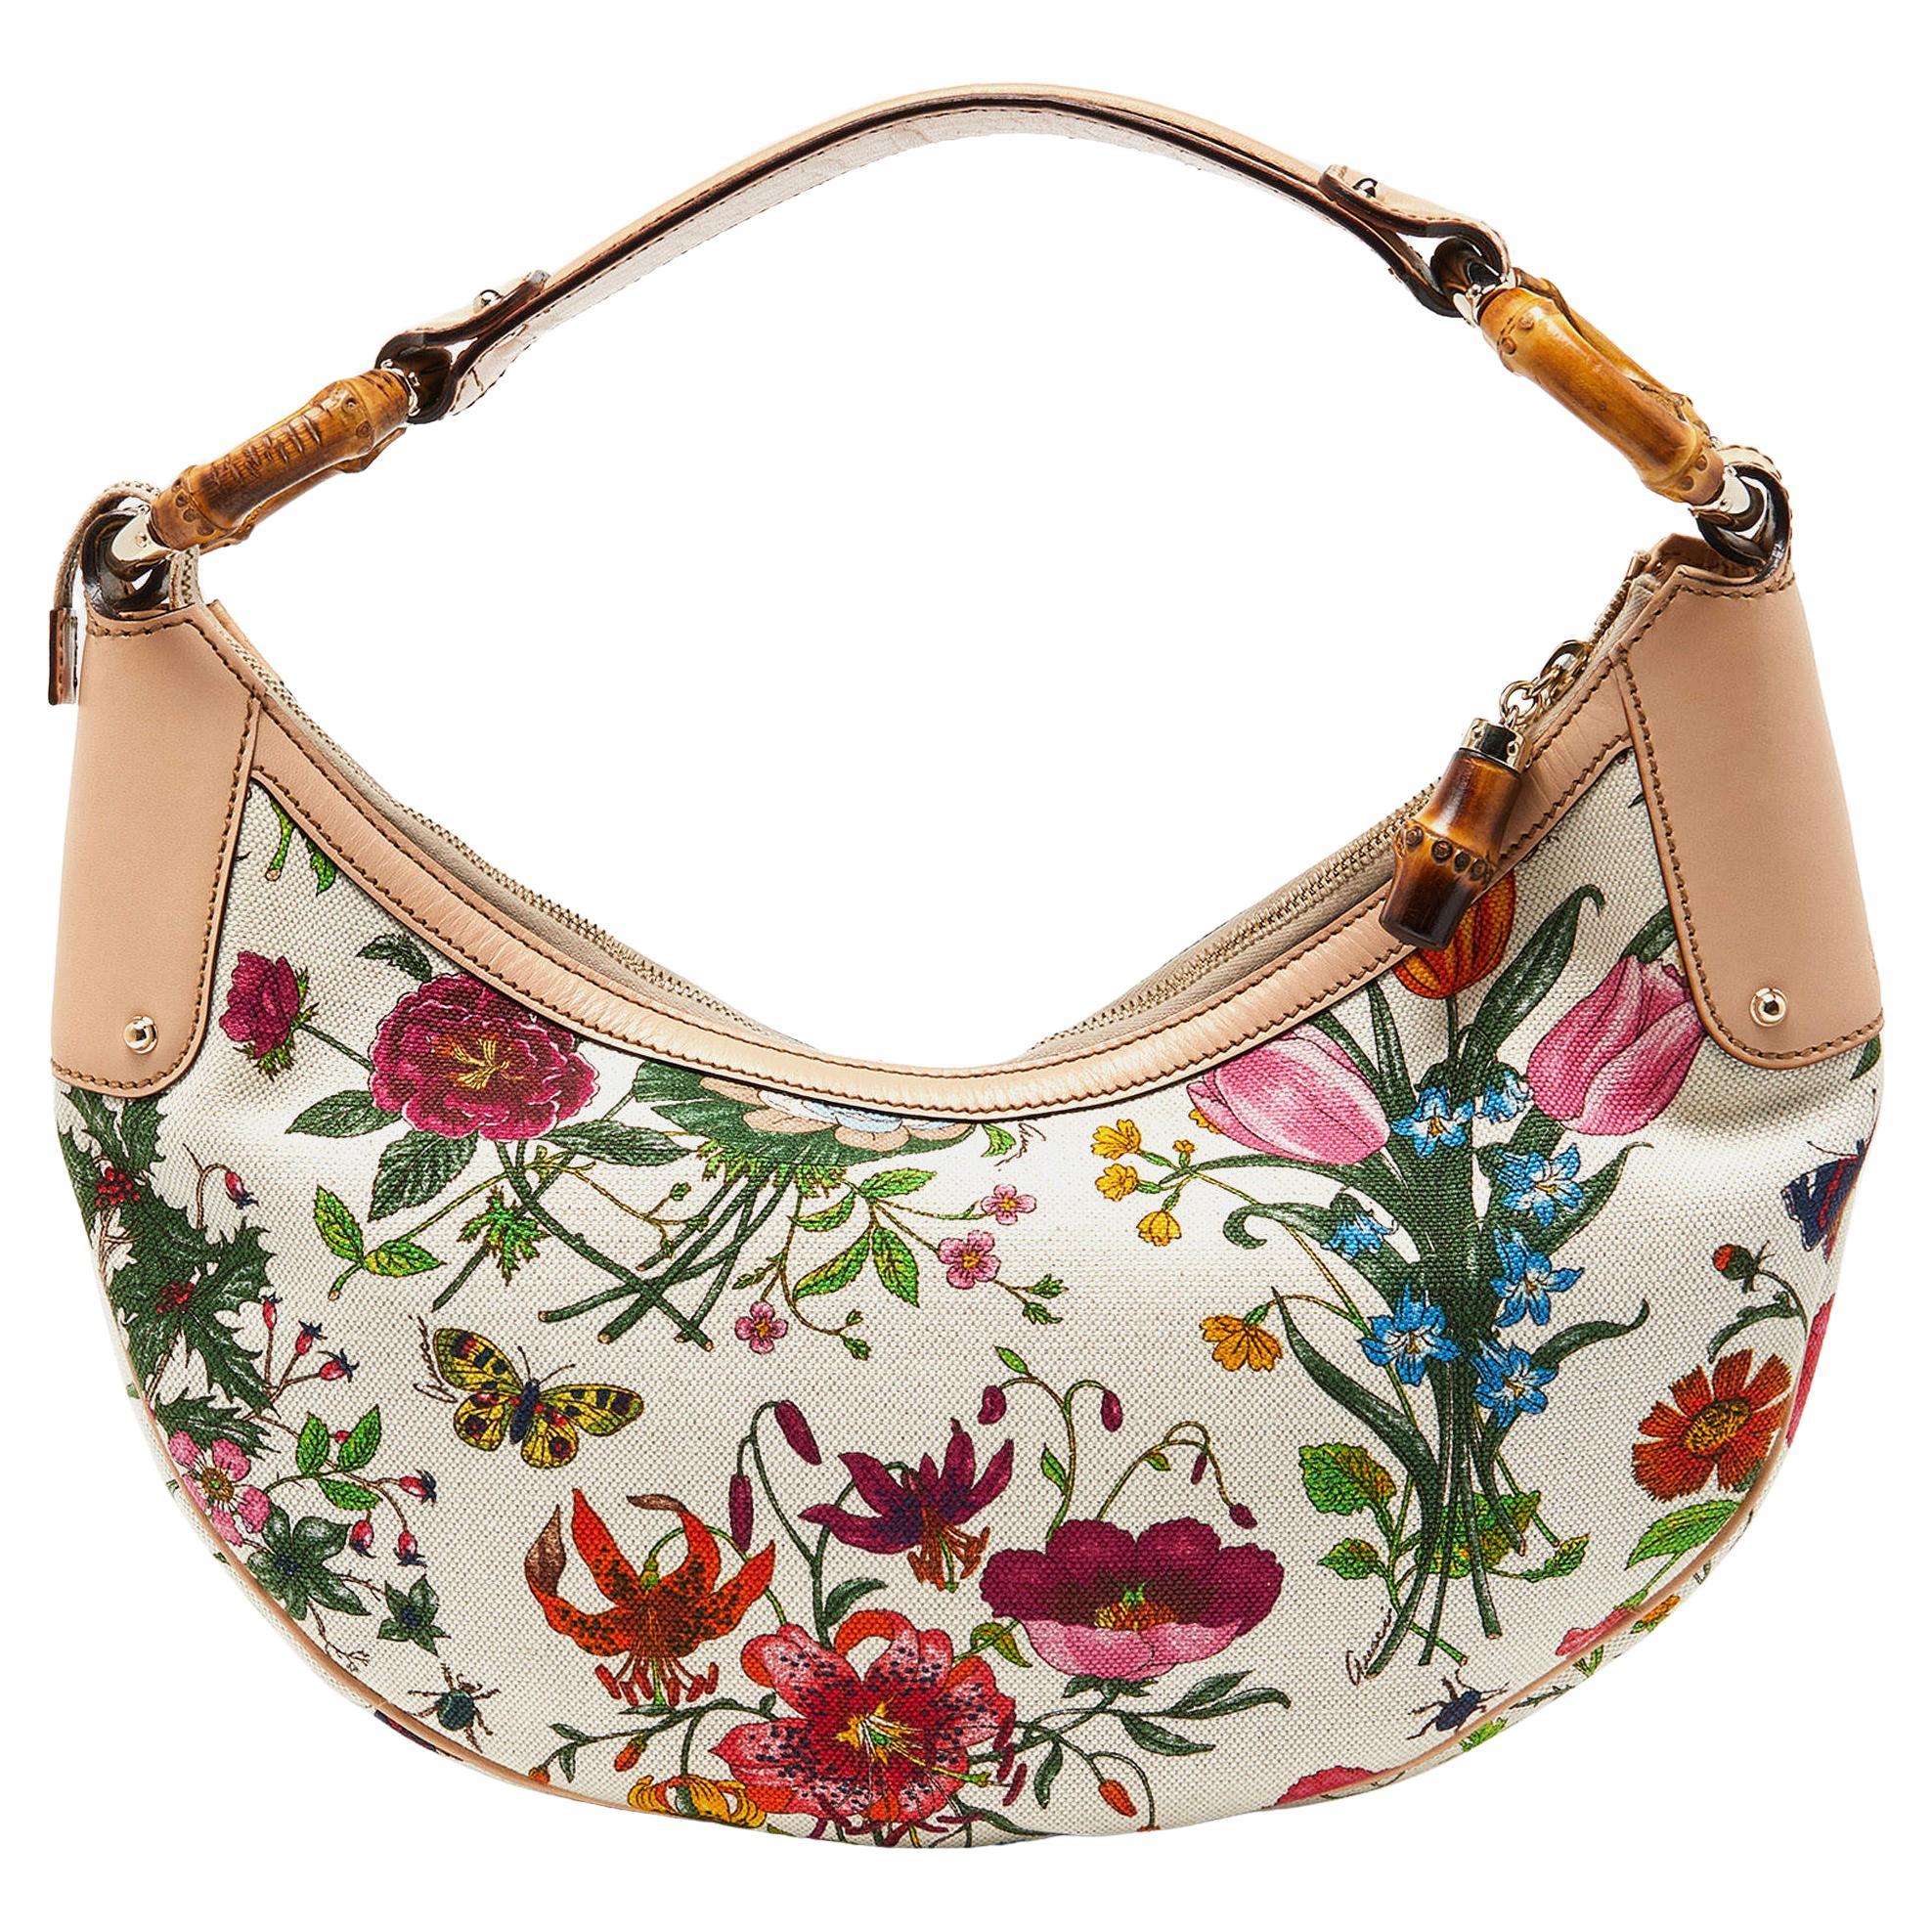 Gucci Multicolor Botanical Floral Canvas and Leather Bamboo Ring Hobo